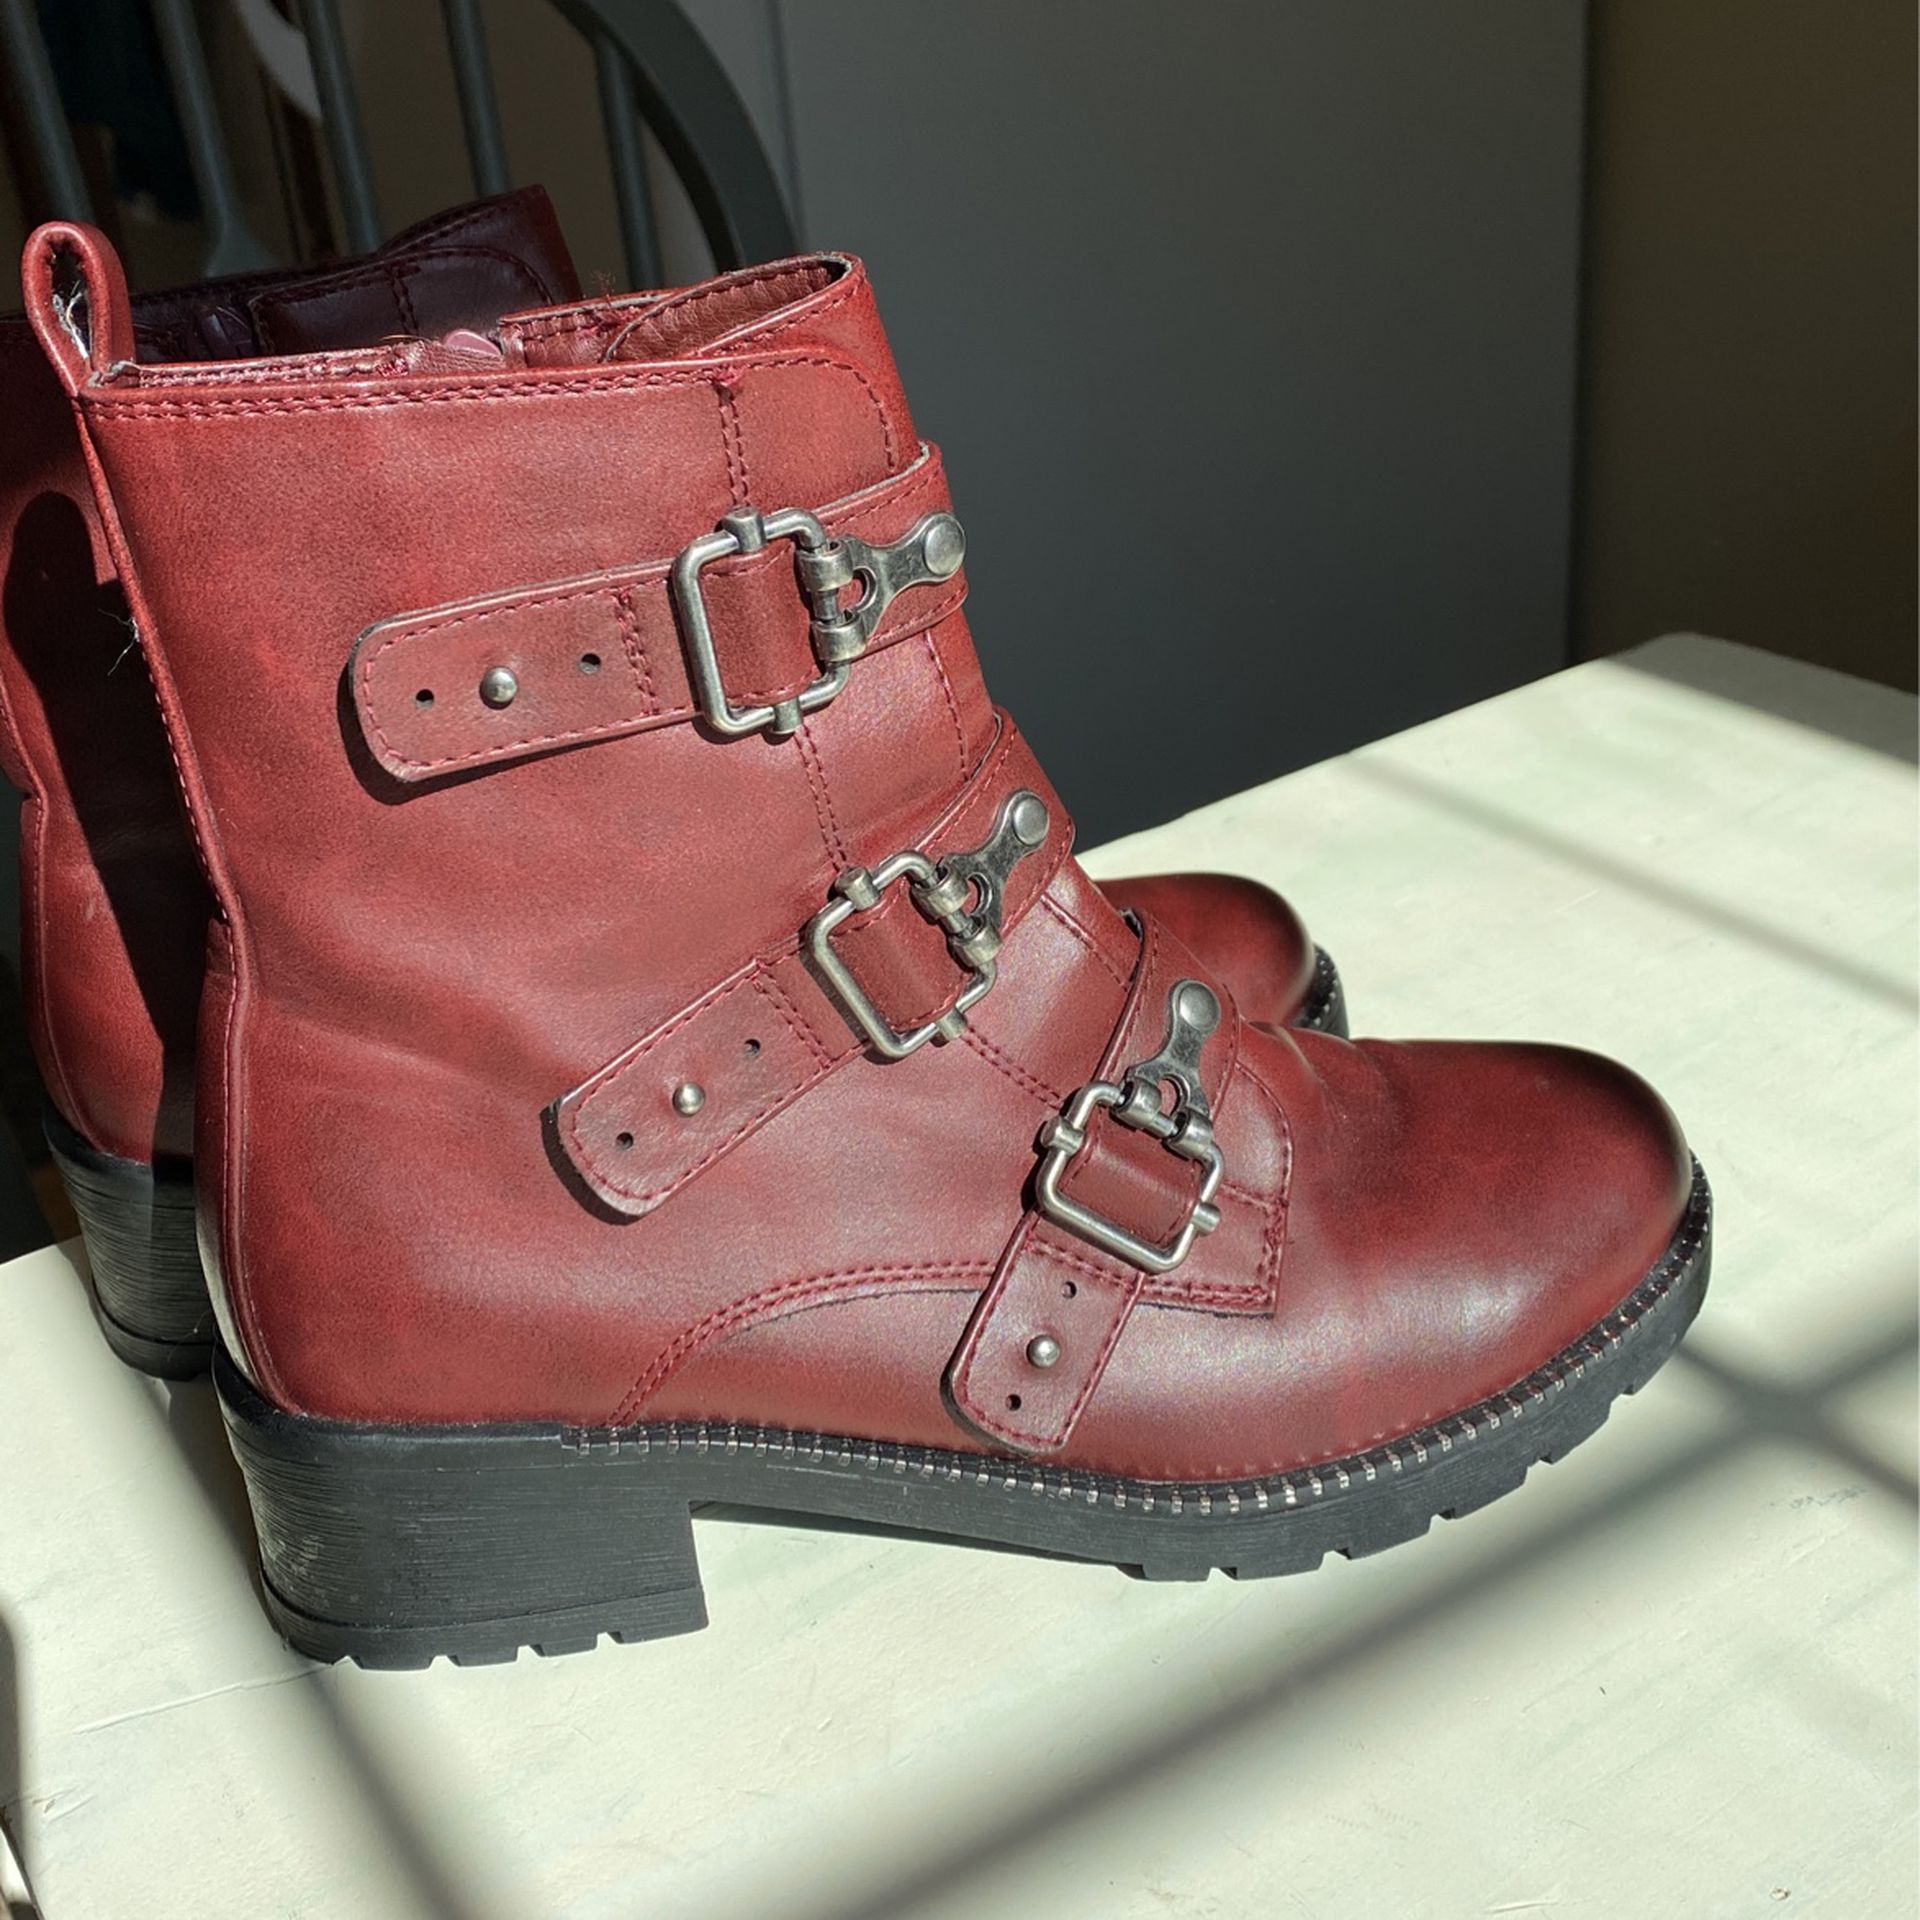 Burgundy Ankle Boots With Zip Up On The Side Very Pretty Color